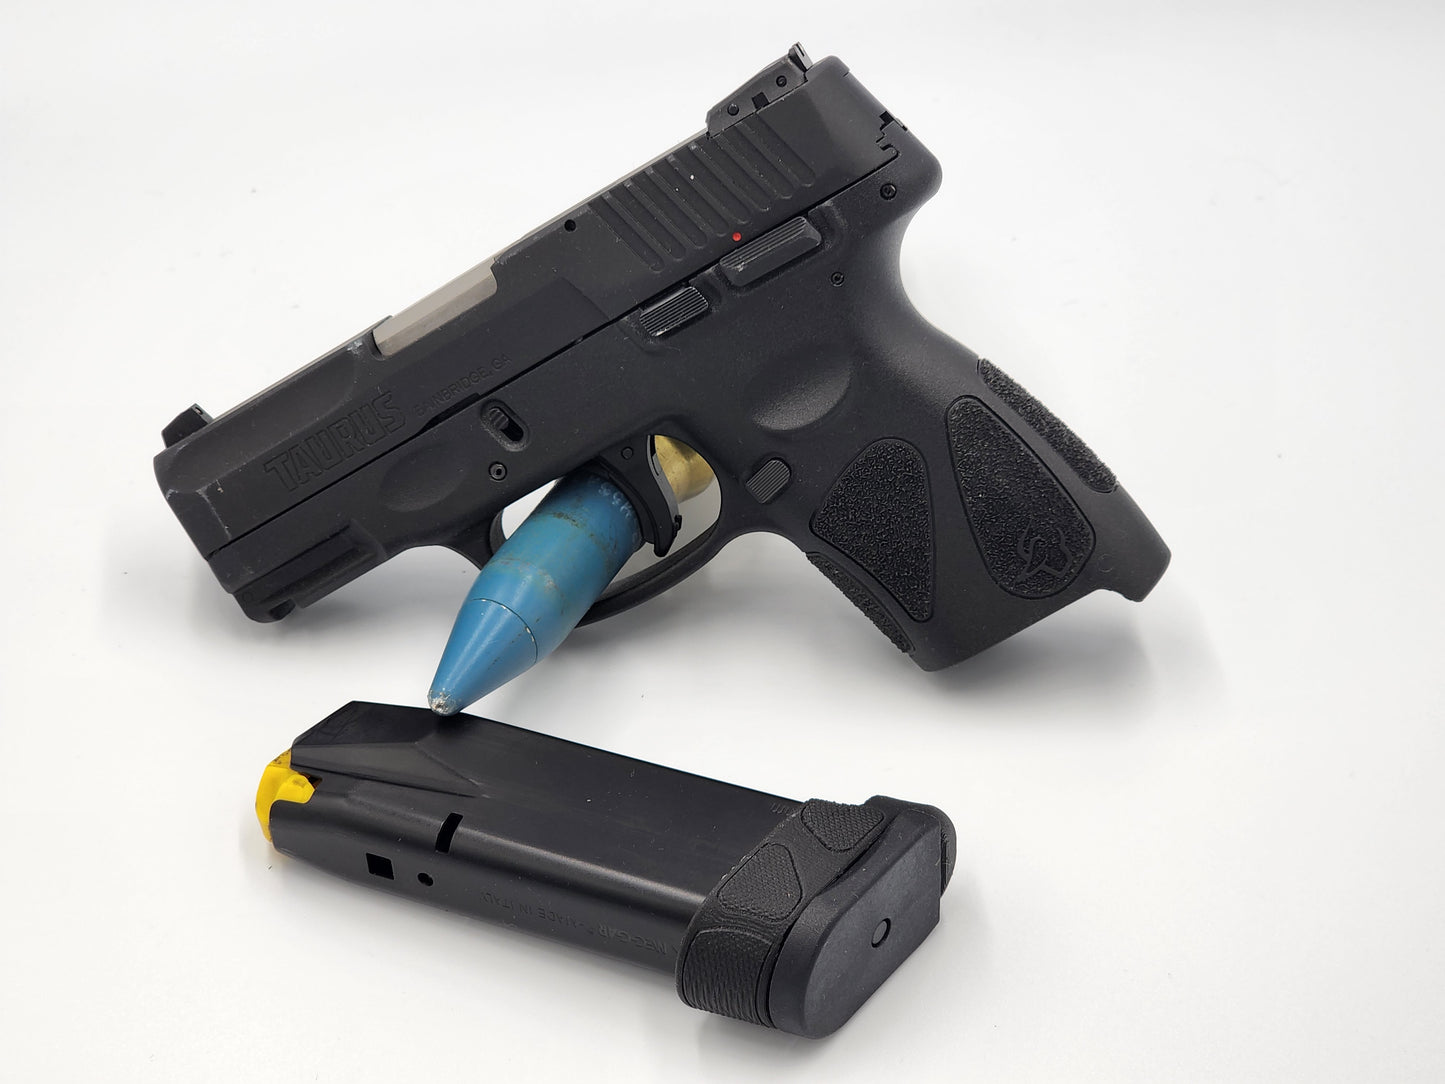 the Taurus G3c and G2c Magazine Adapter gives you the versatility of a full size grip on a compact gun